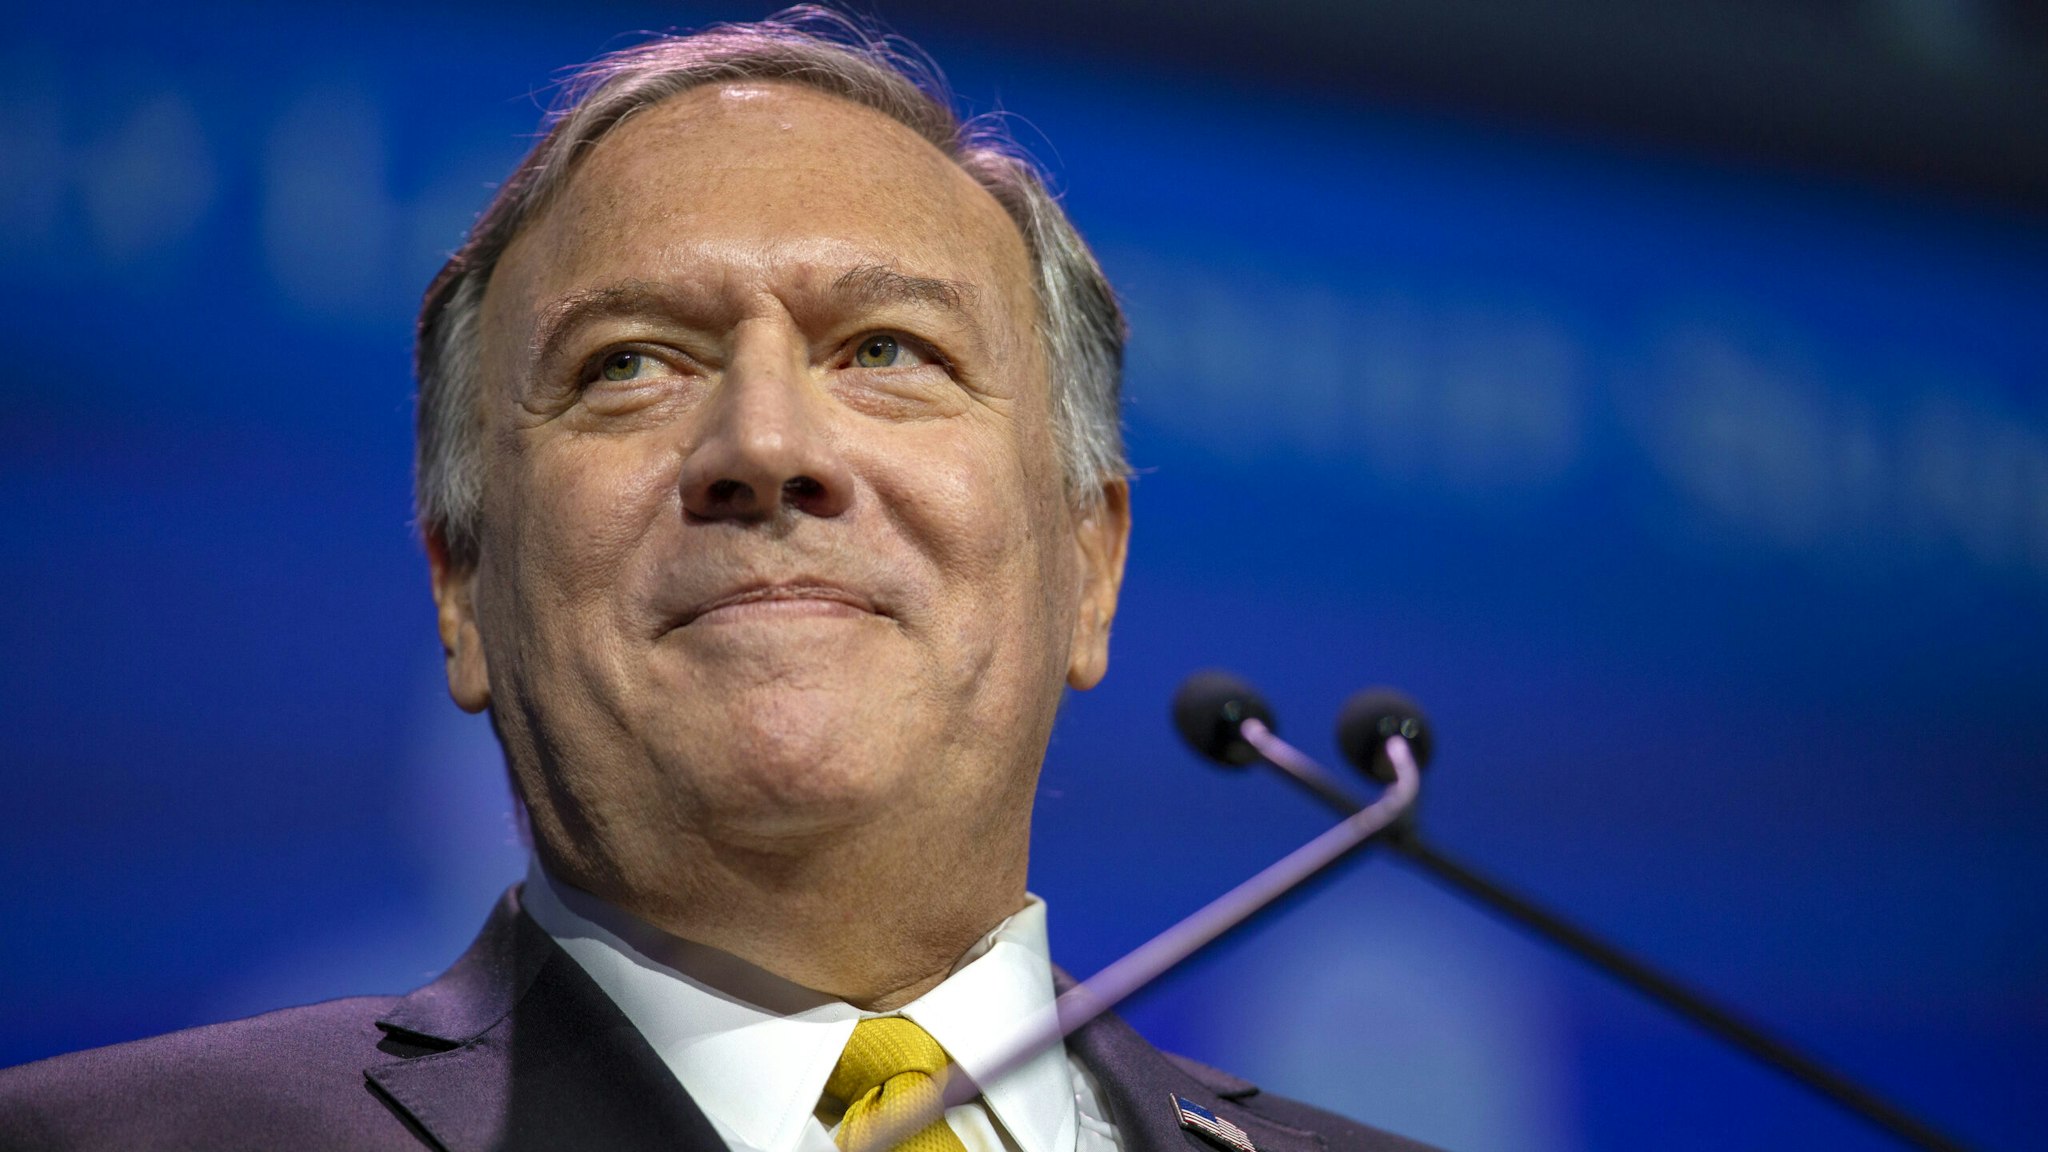 Michael Pompeo, former U.S. secretary of state, during the FAMiLY Leader summit in Des Moines, Iowa, U.S., on Friday, July 16, 2021. Former Vice President Mike Pence is headlining the evangelical group's 10th annual leadership summit.